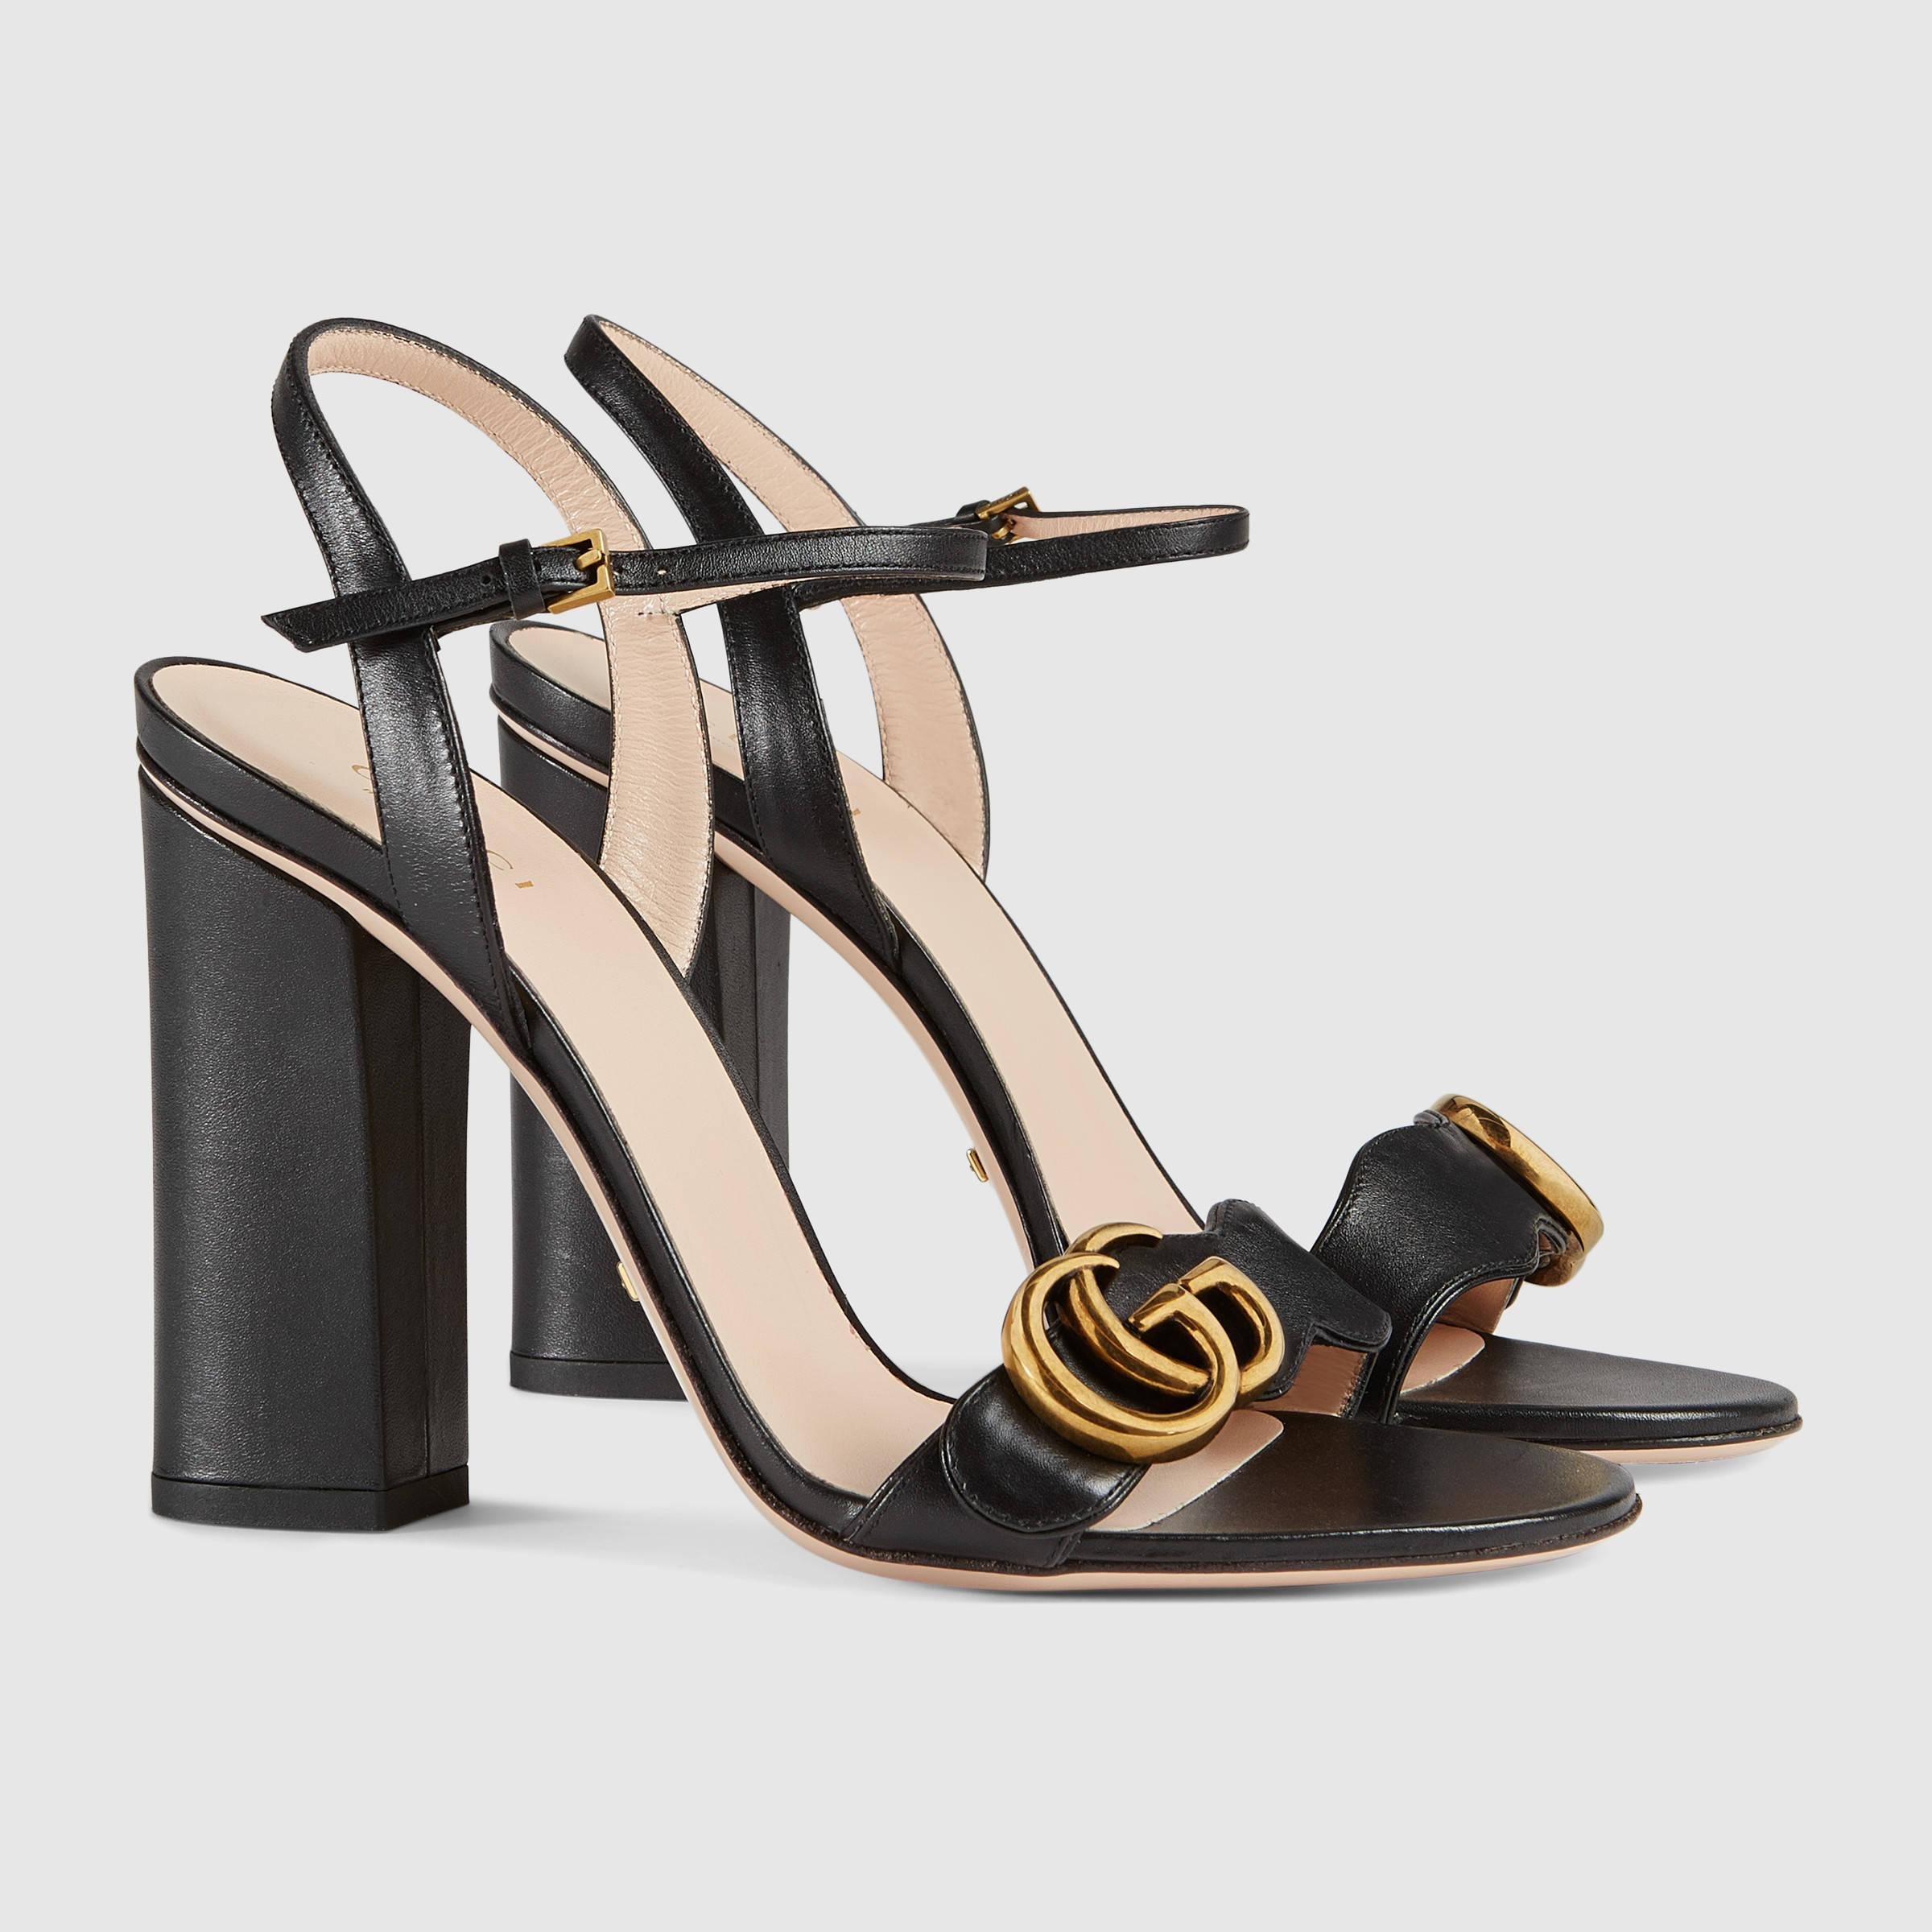 Lyst - Gucci Leather Sandal